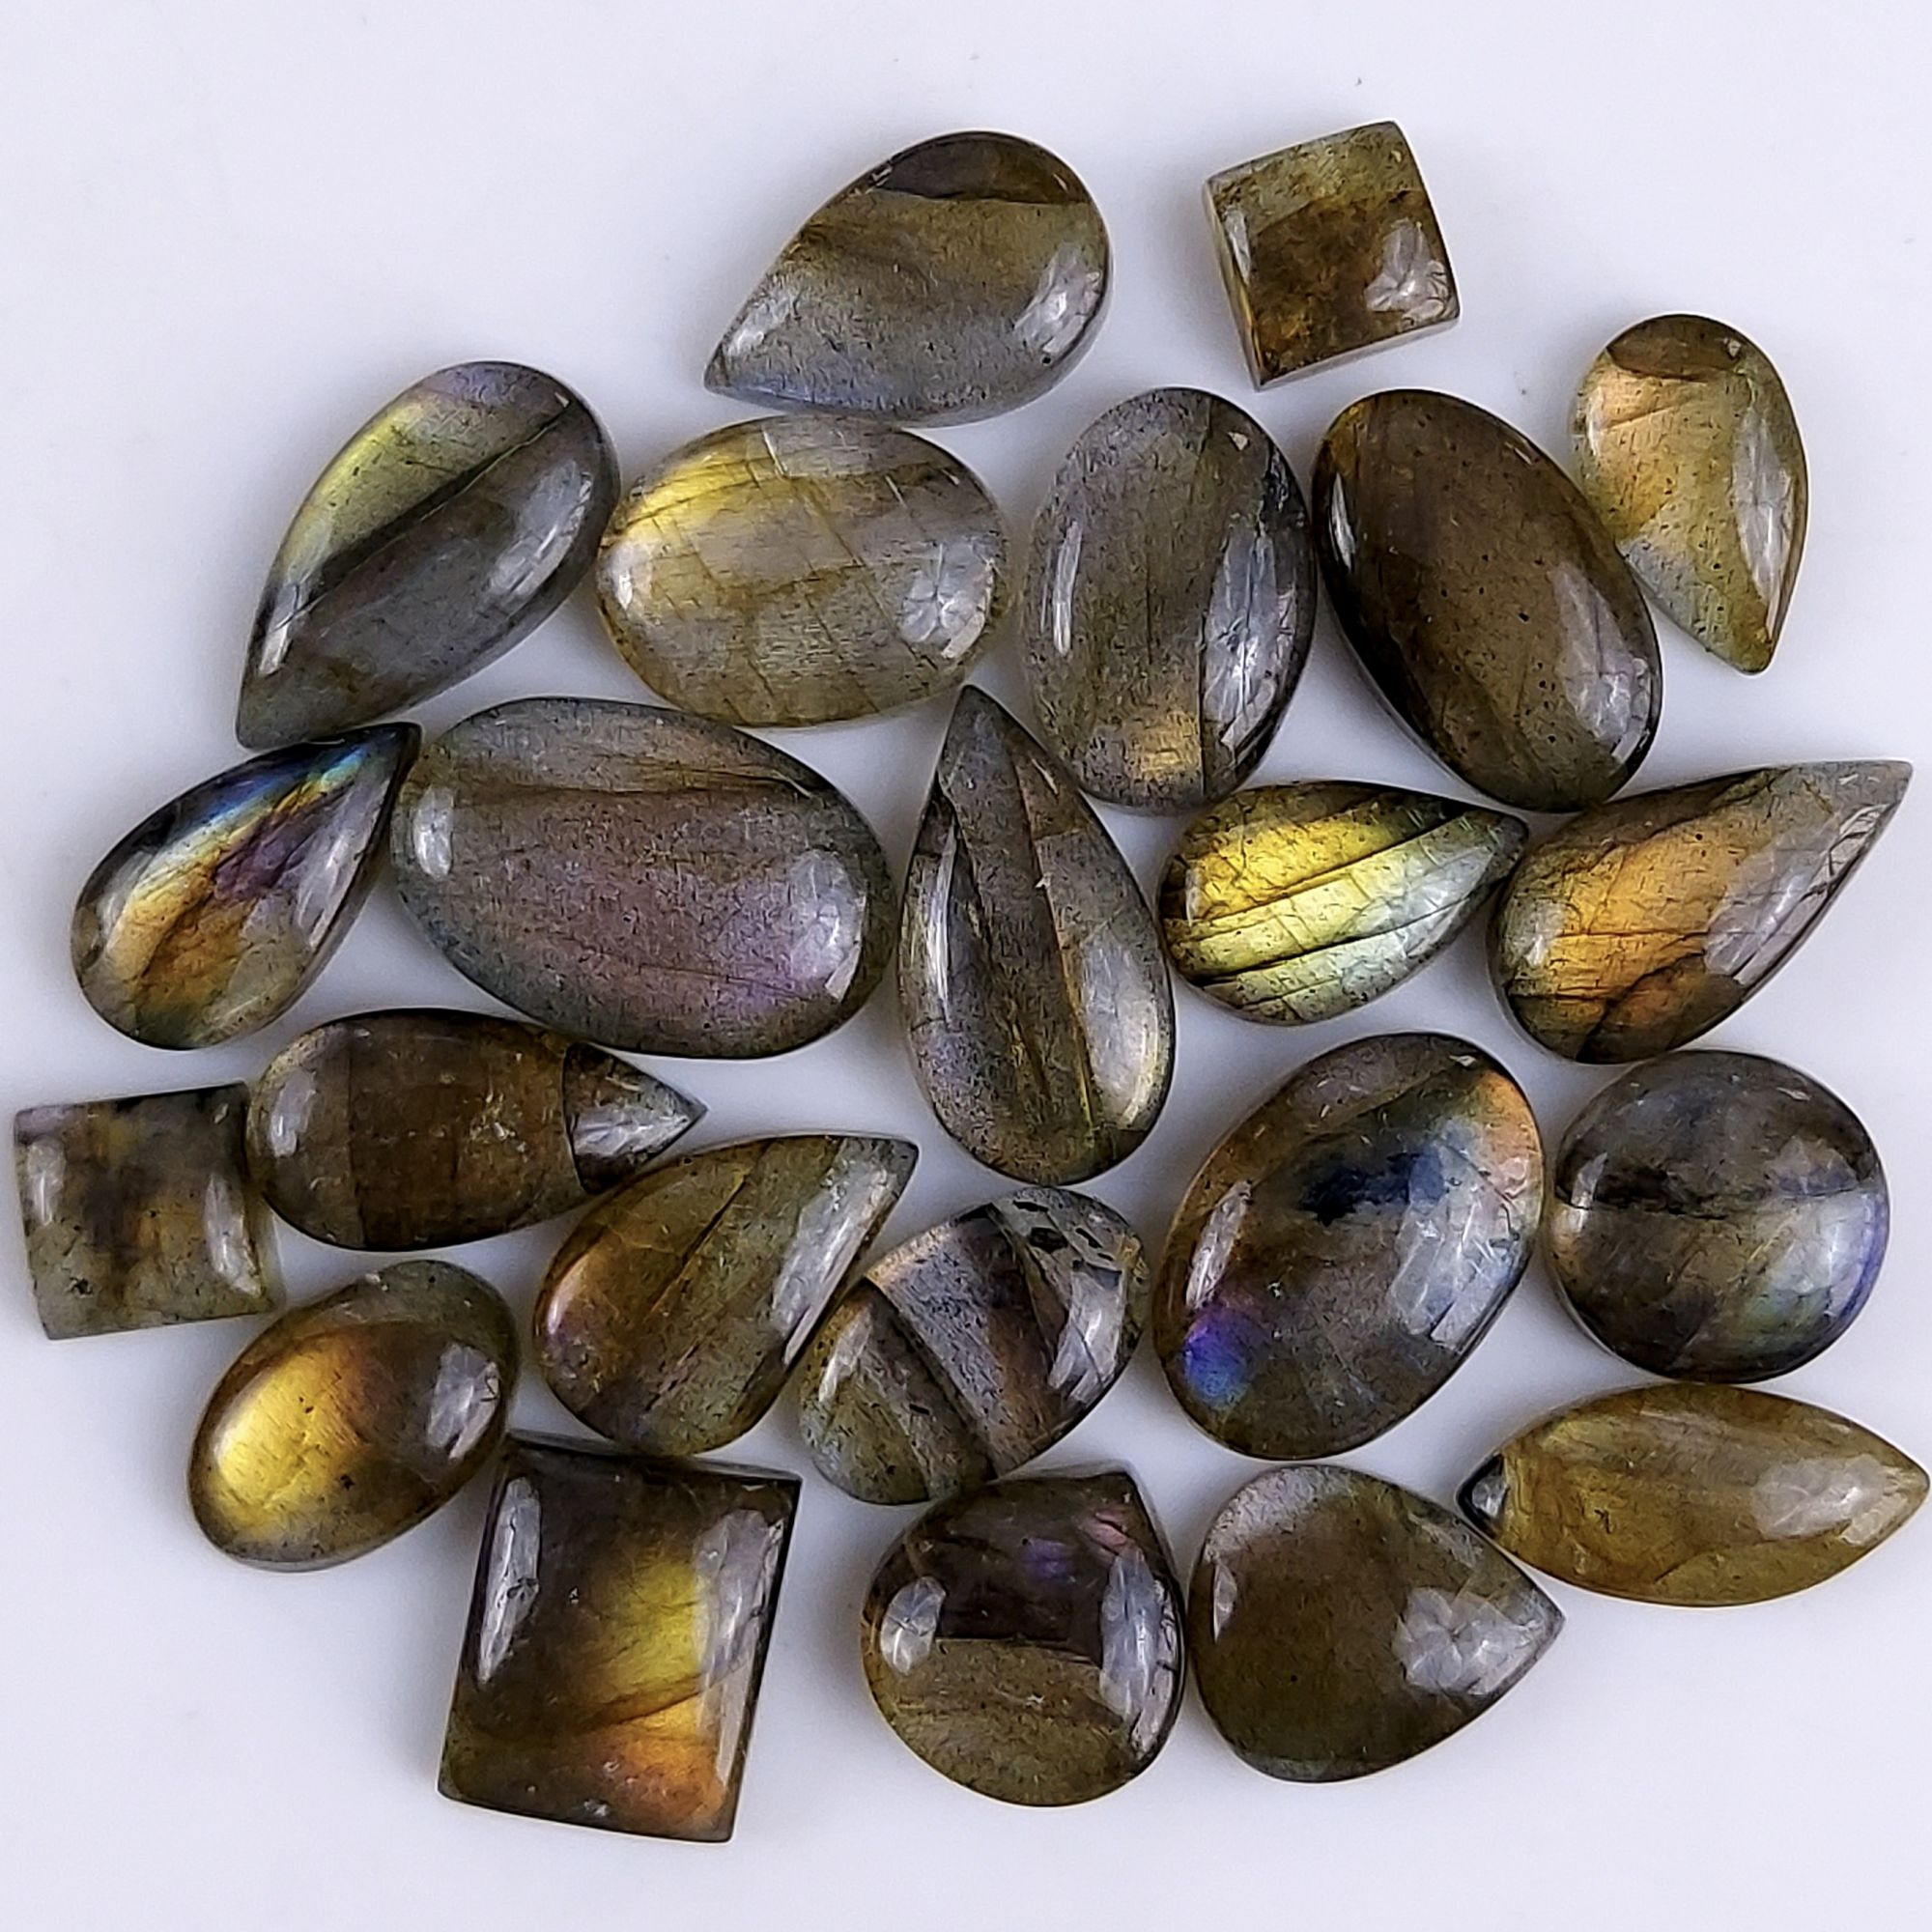 23Pcs 88Cts Natural Purple Fire Labradorite Cabochon Loose Gemstone Lot For Jewelry Making 15x10 6x6mm #8642